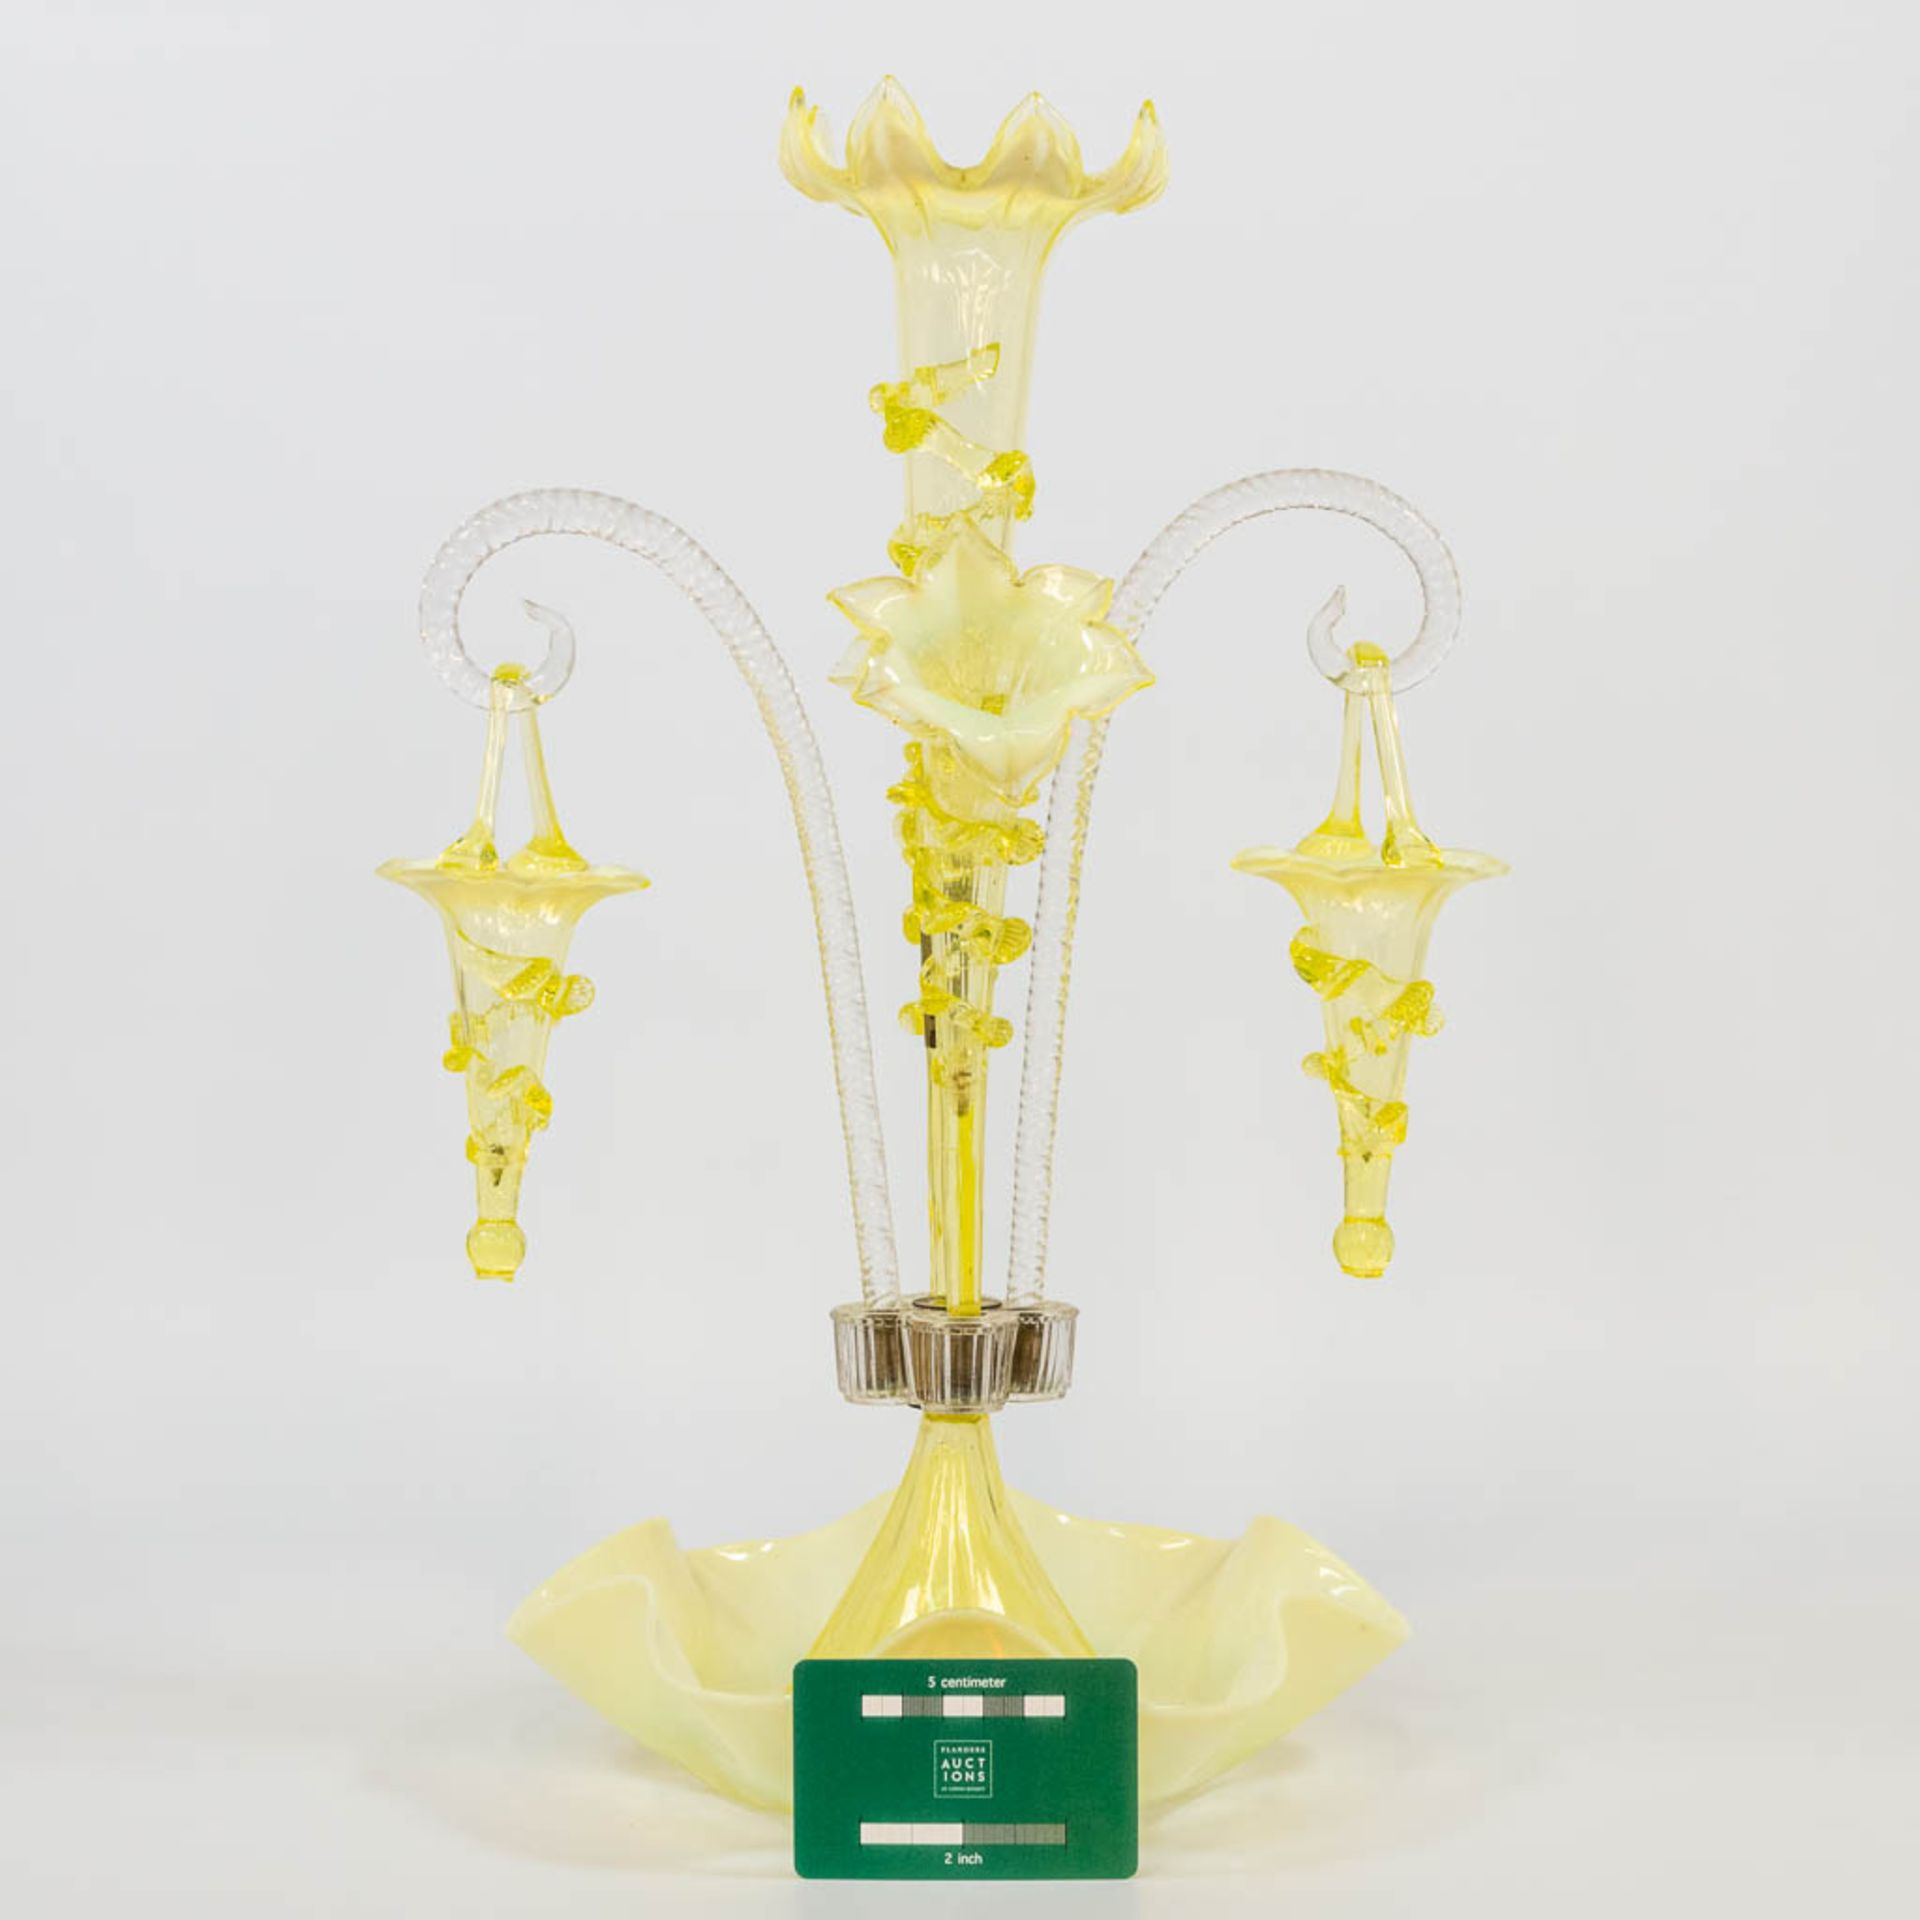 A yellow and clear glass table centrepiece pic-fleur, made in Murano, Italy. (25 x 28 x 45 cm) - Image 2 of 15